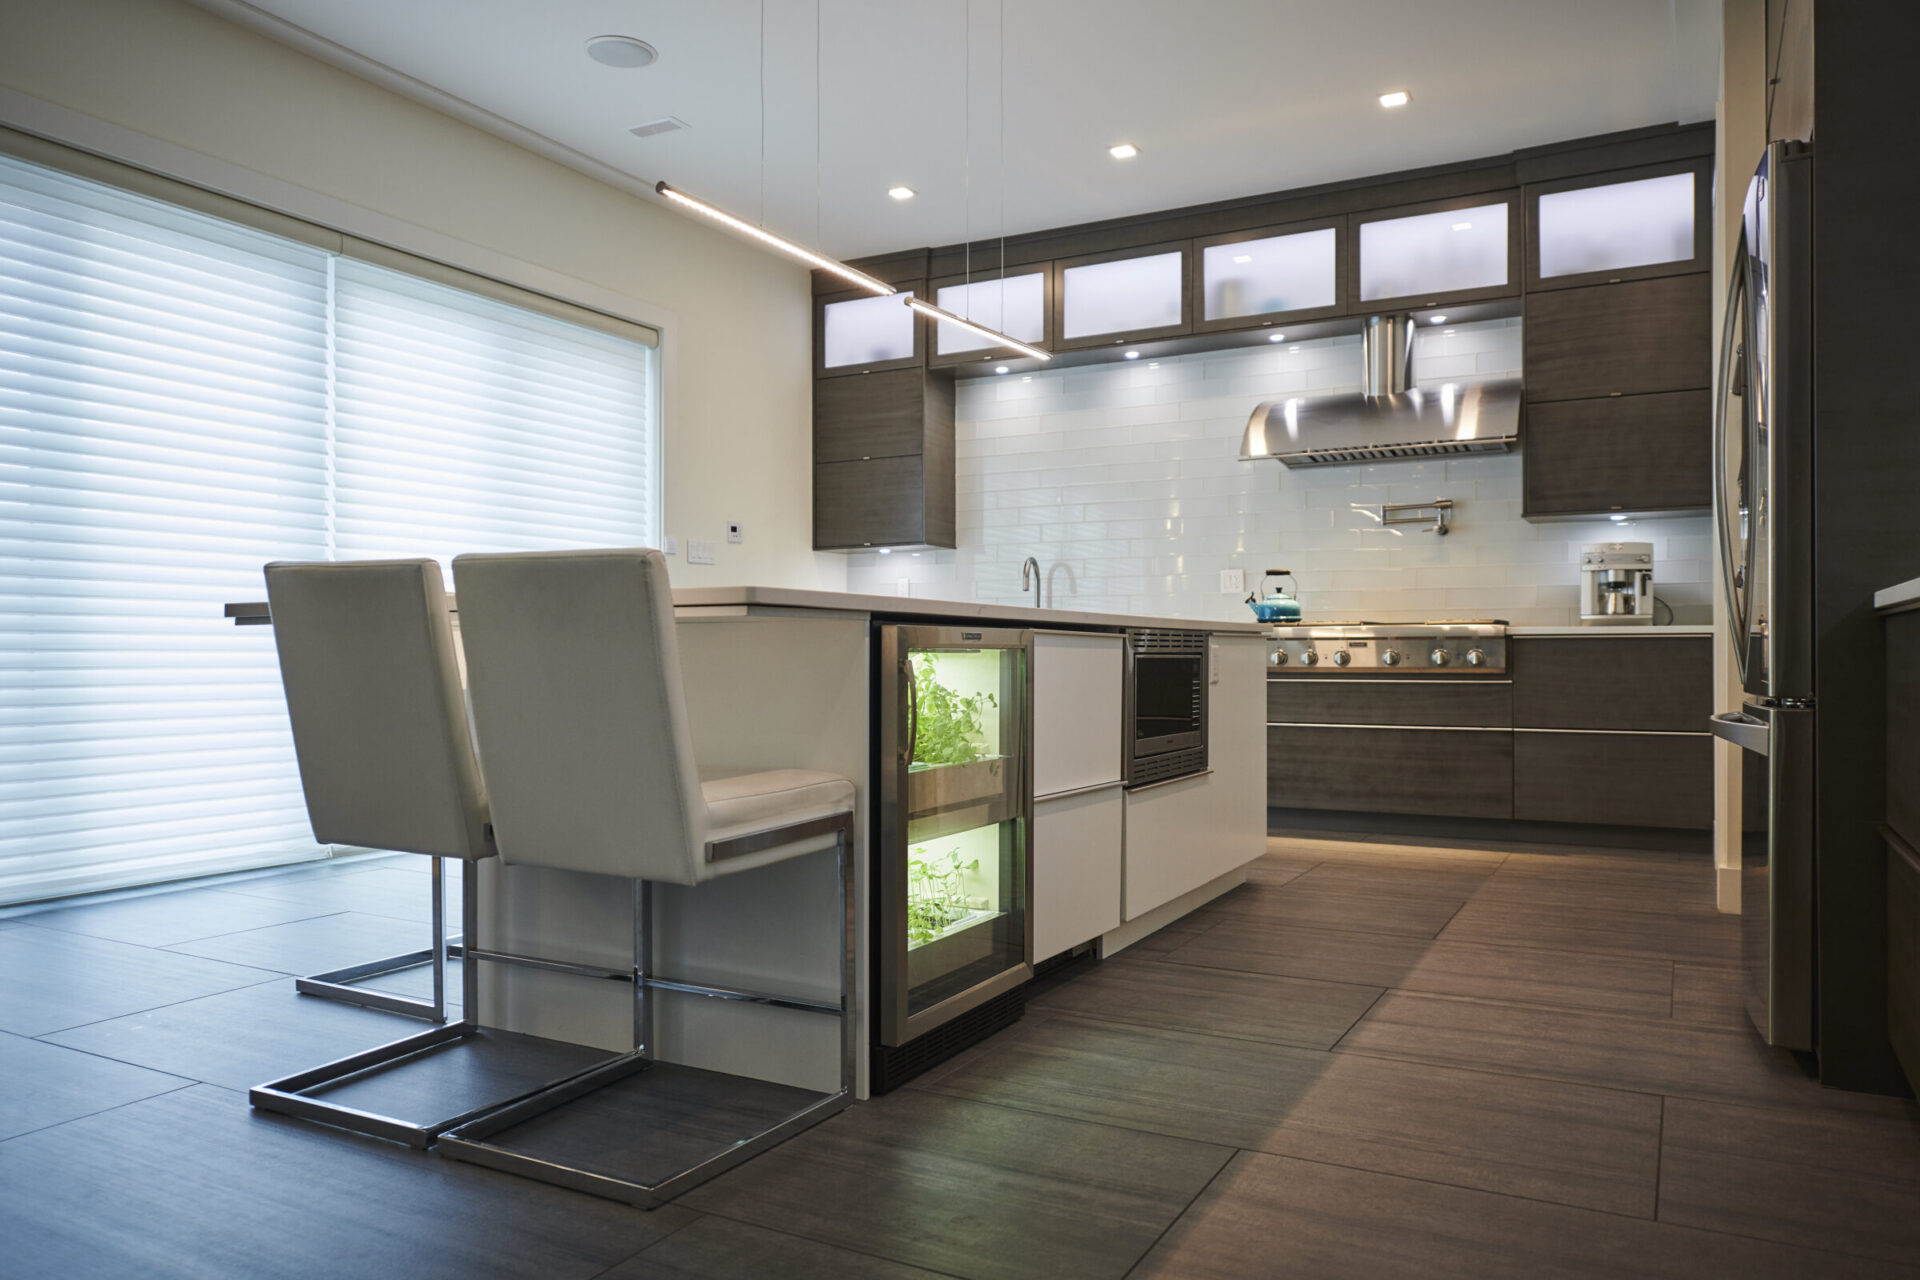 Modern kitchen interior with dark wood flooring, white countertops, stainless steel appliances, bar stools, and abundant natural light filtering through blinds.